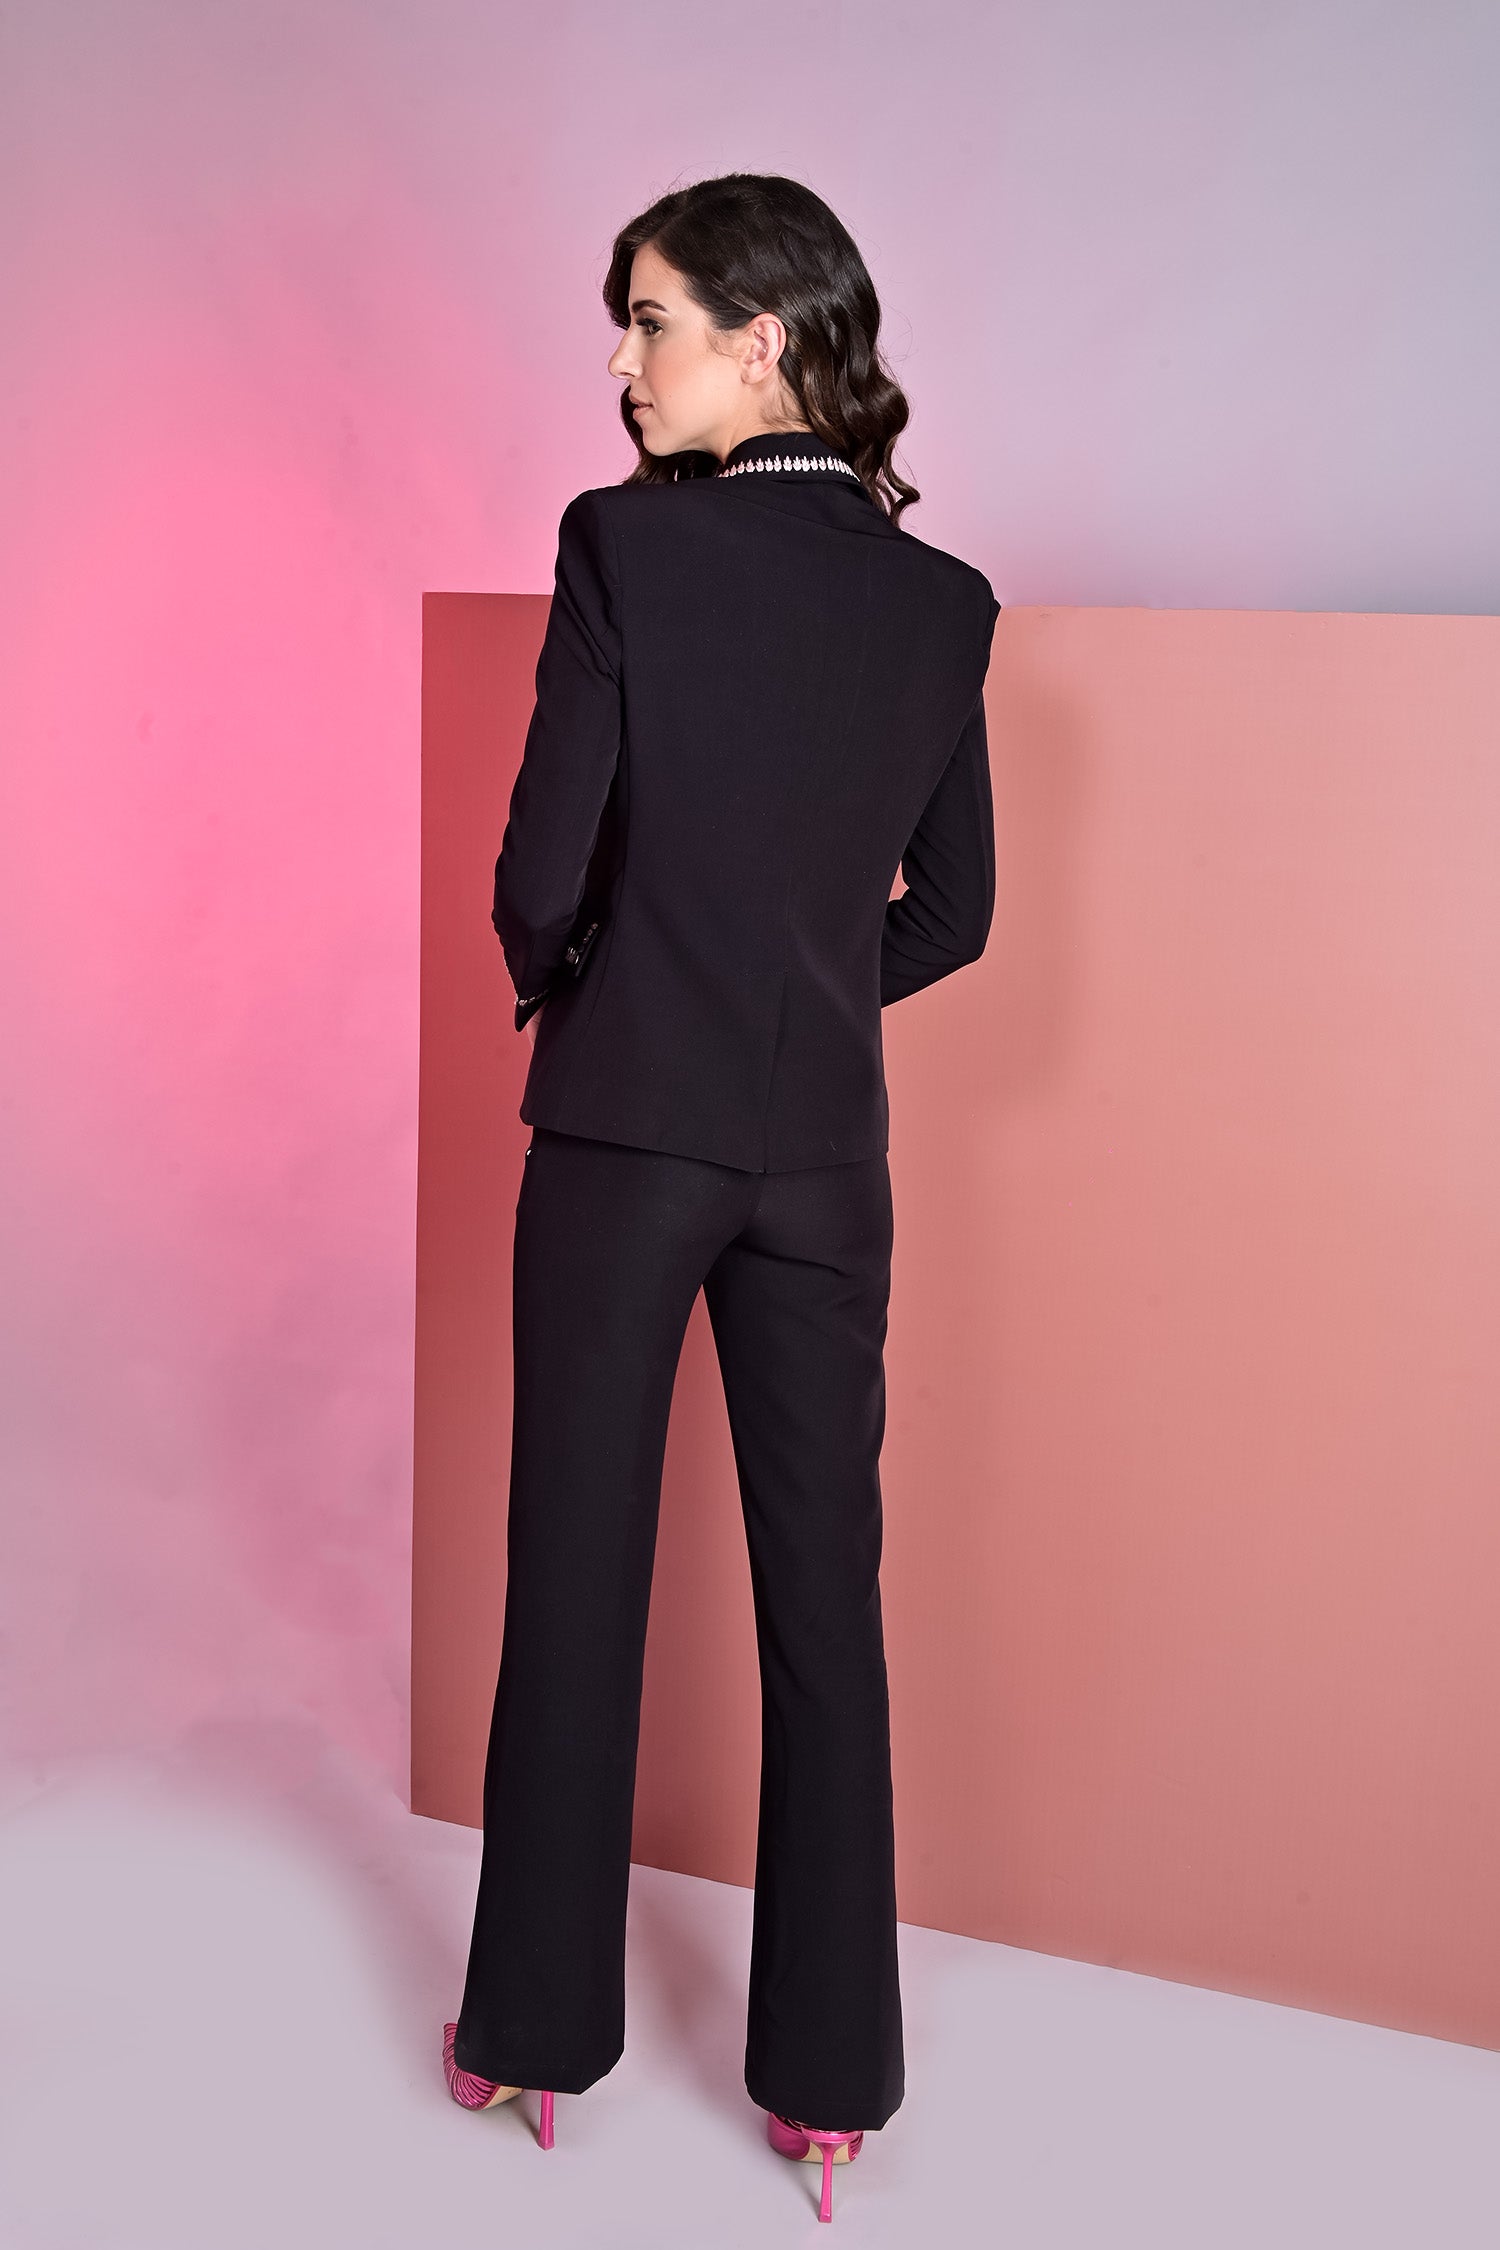 Petal Embroidered Black Blazer With Crop Top and Flared Pants